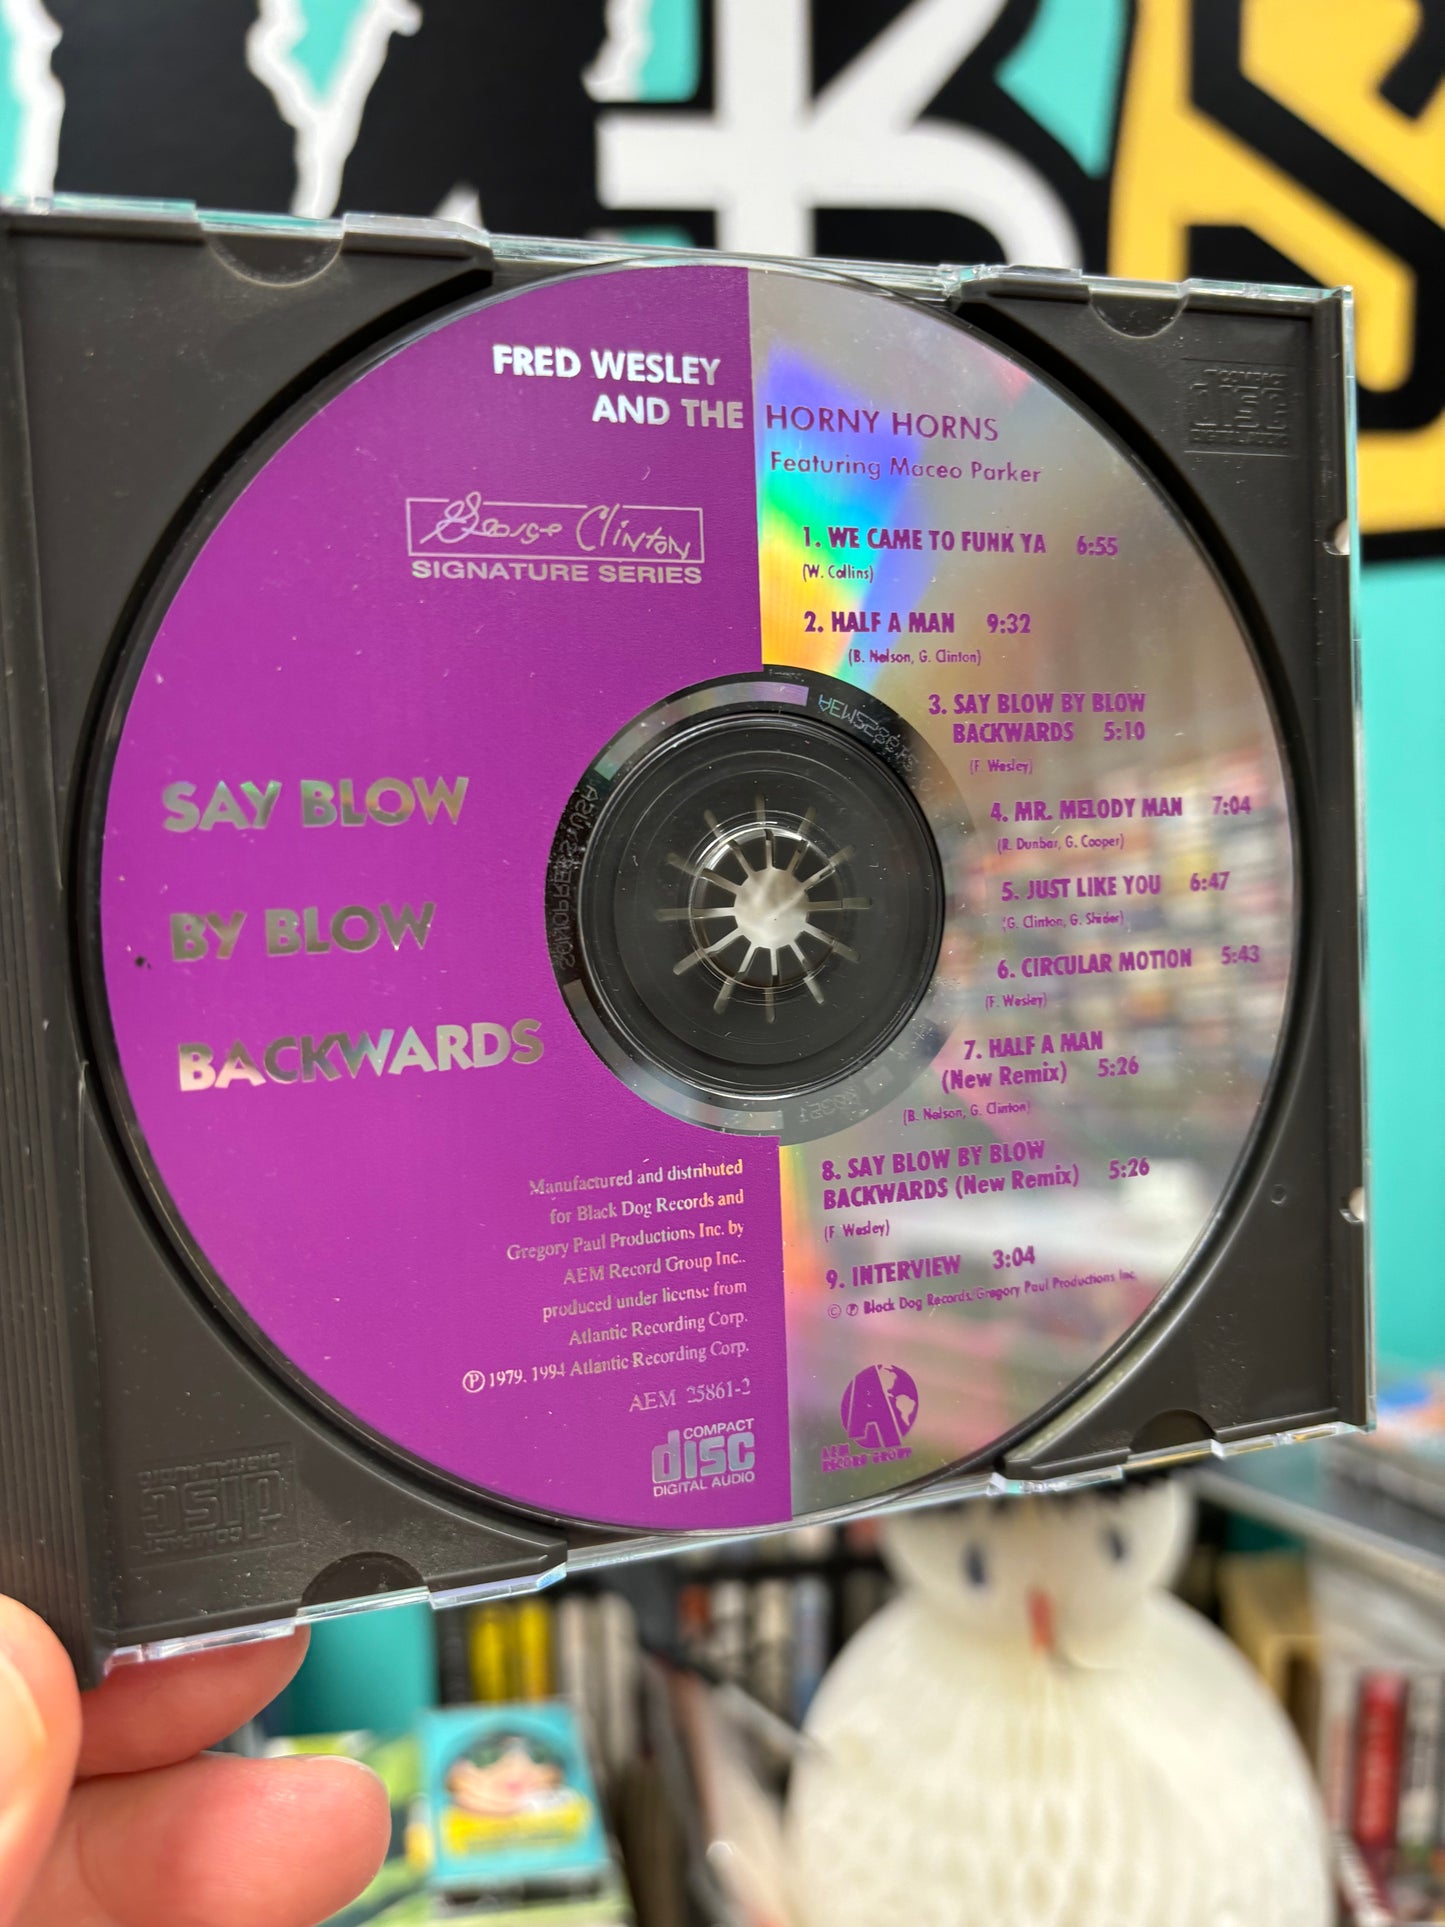 Fred Wesley & The Horny Horns: Say Blow By Blow Backwards, CD, reissue, US 1994